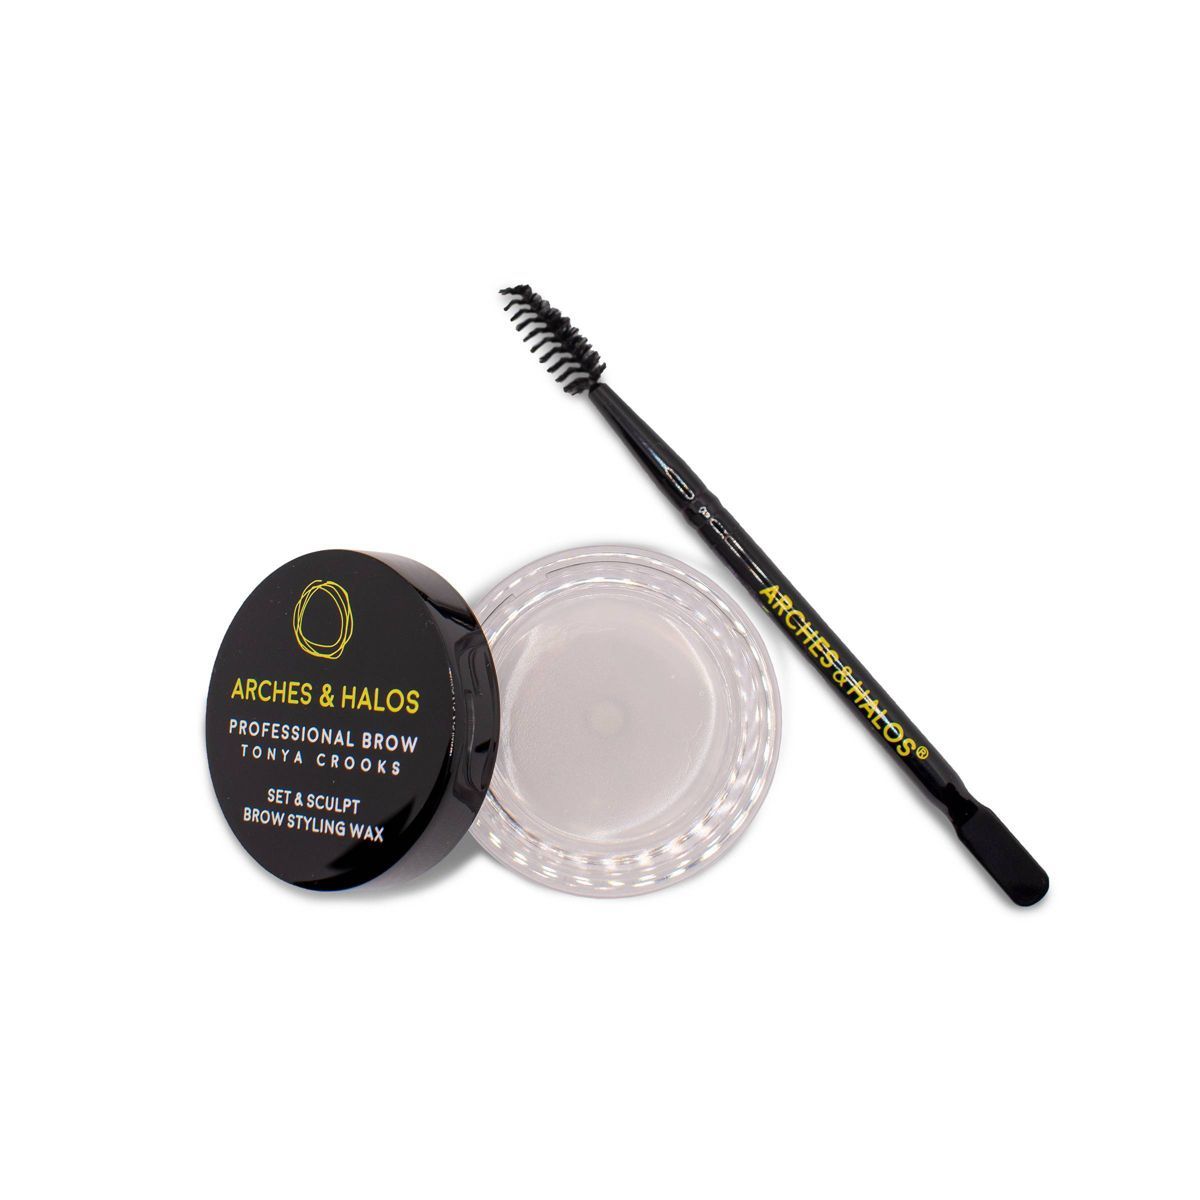 Arches & Halos Set & Sculpt Brow Styling Wax - 0.106oz | Target